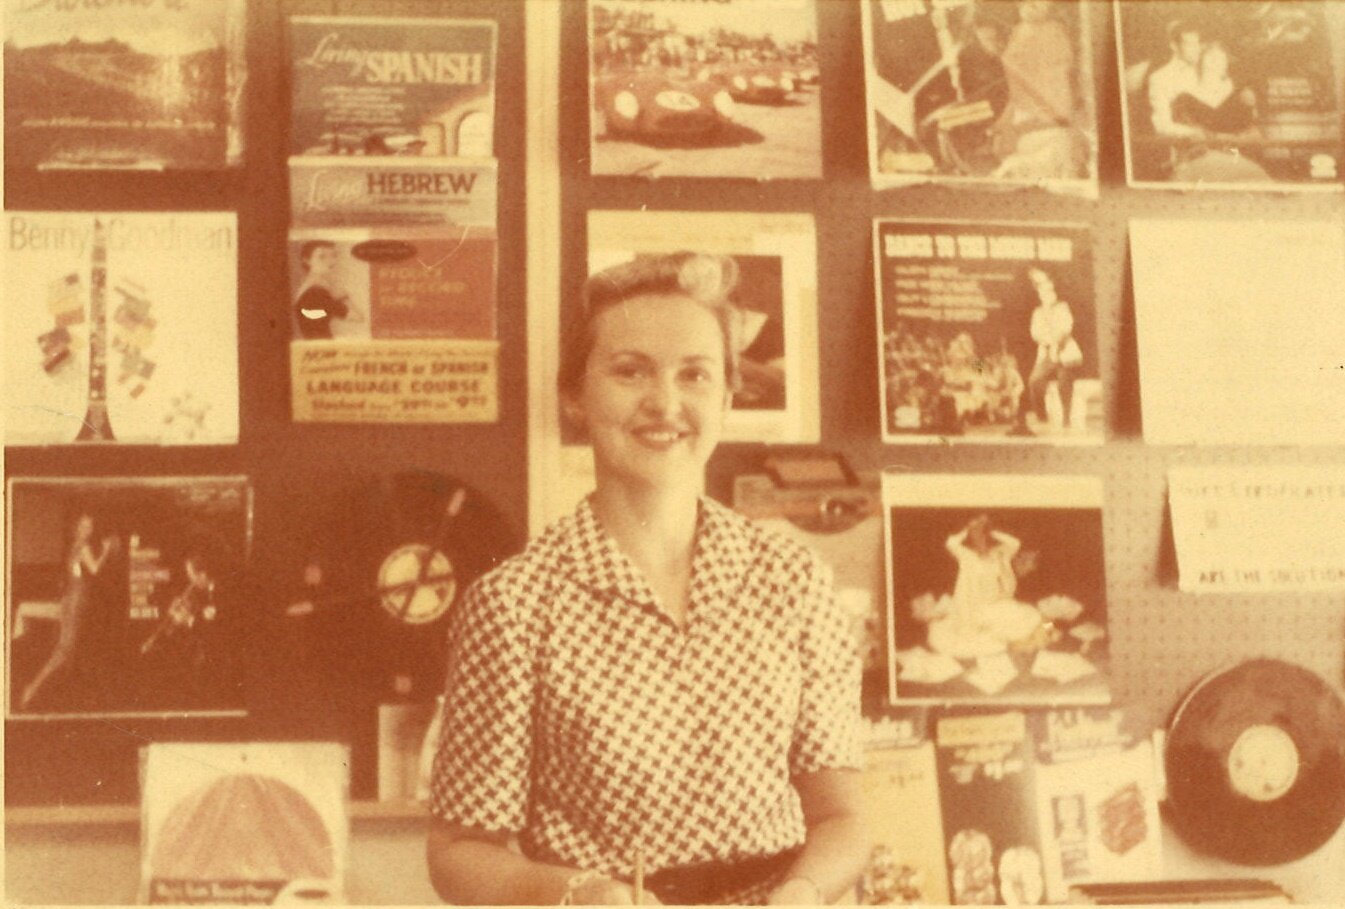 Kathleen Bruton, Record Town Founder Passes Away at 97